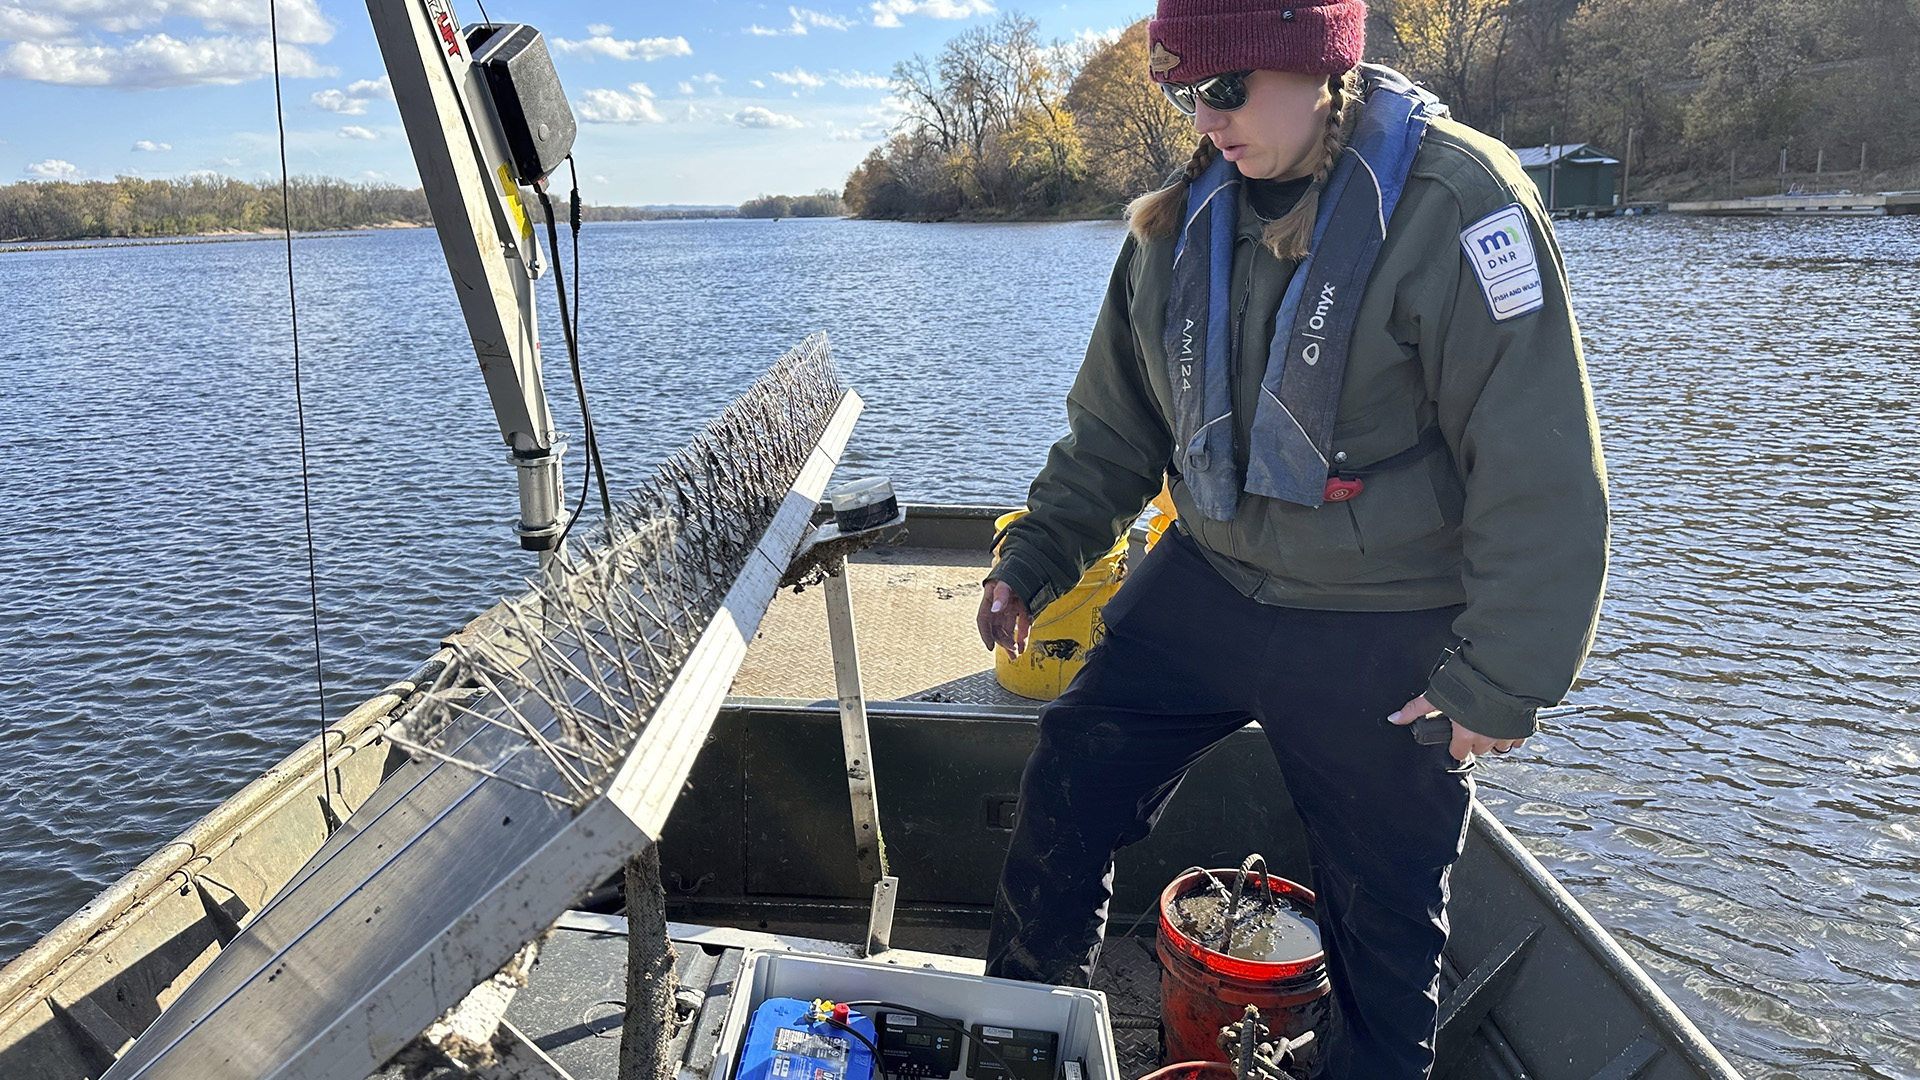 Tagged fish lead to historic week for Asian carp captures on Pool 6 of the  Mississippi - Outdoor News